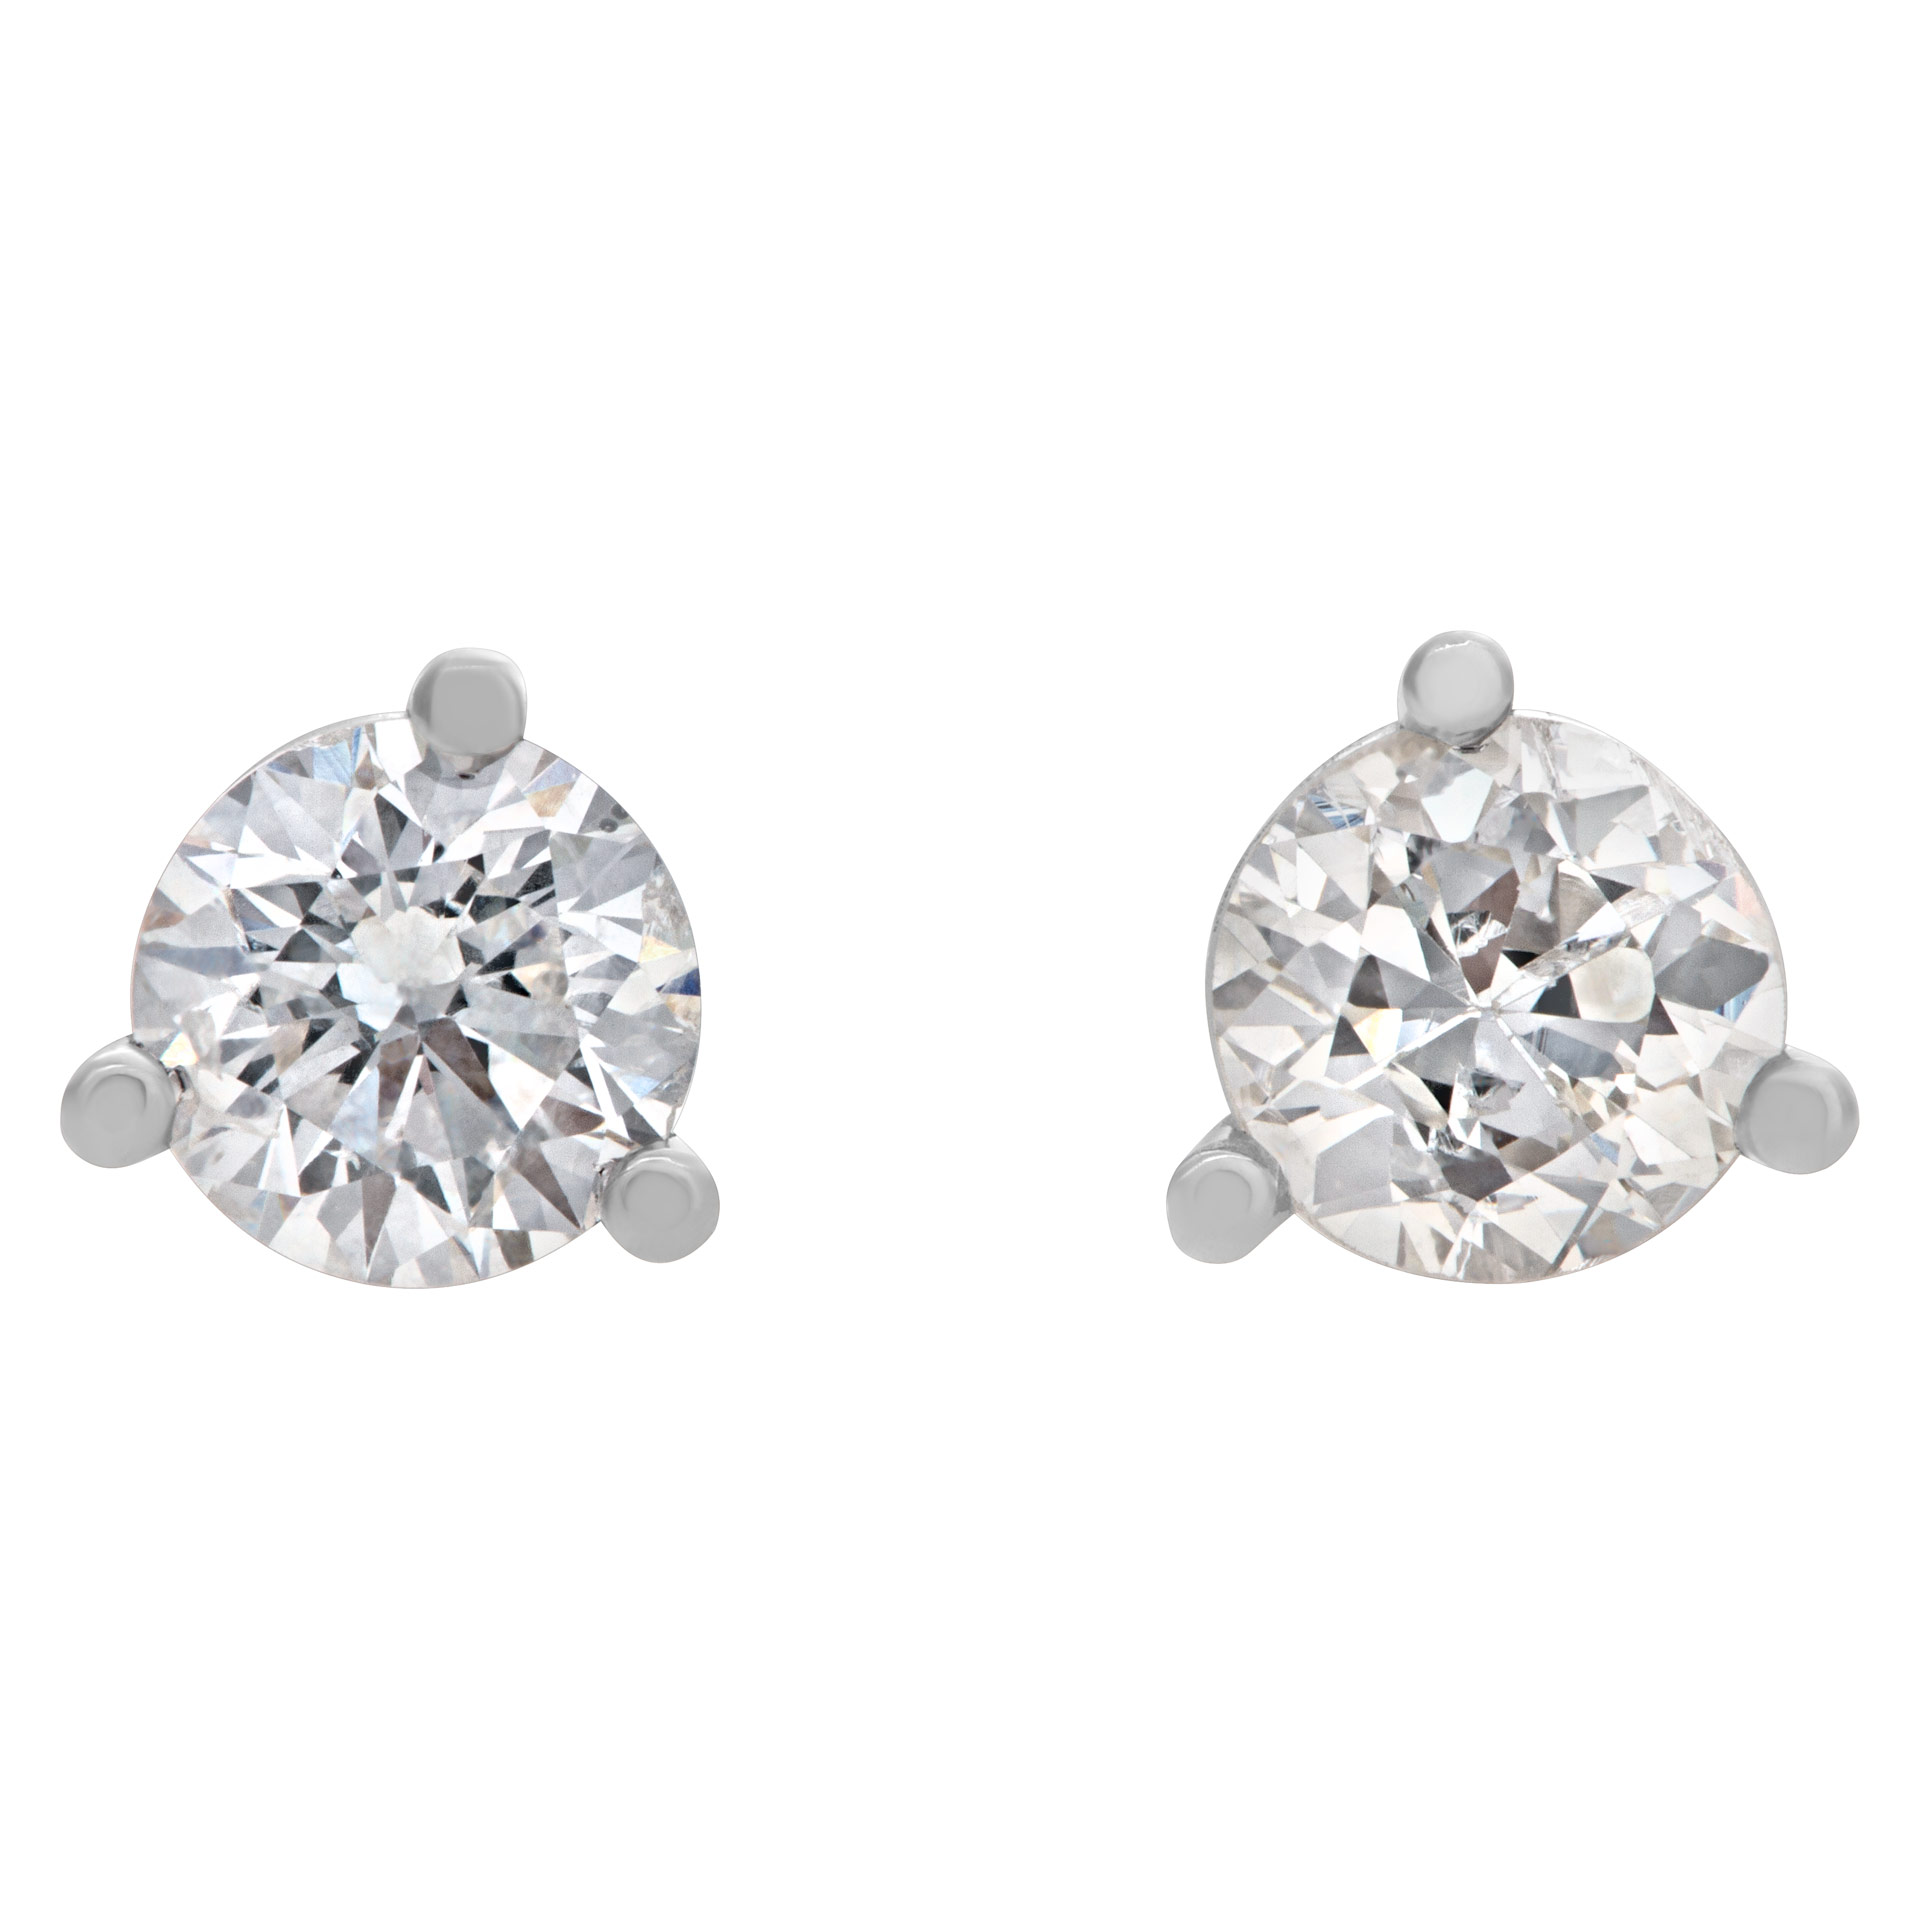 GIA certified round diamond 0.26 carat (G color, I1 clarity) and 0.28 carat (I clor, I1 clarity) image 1